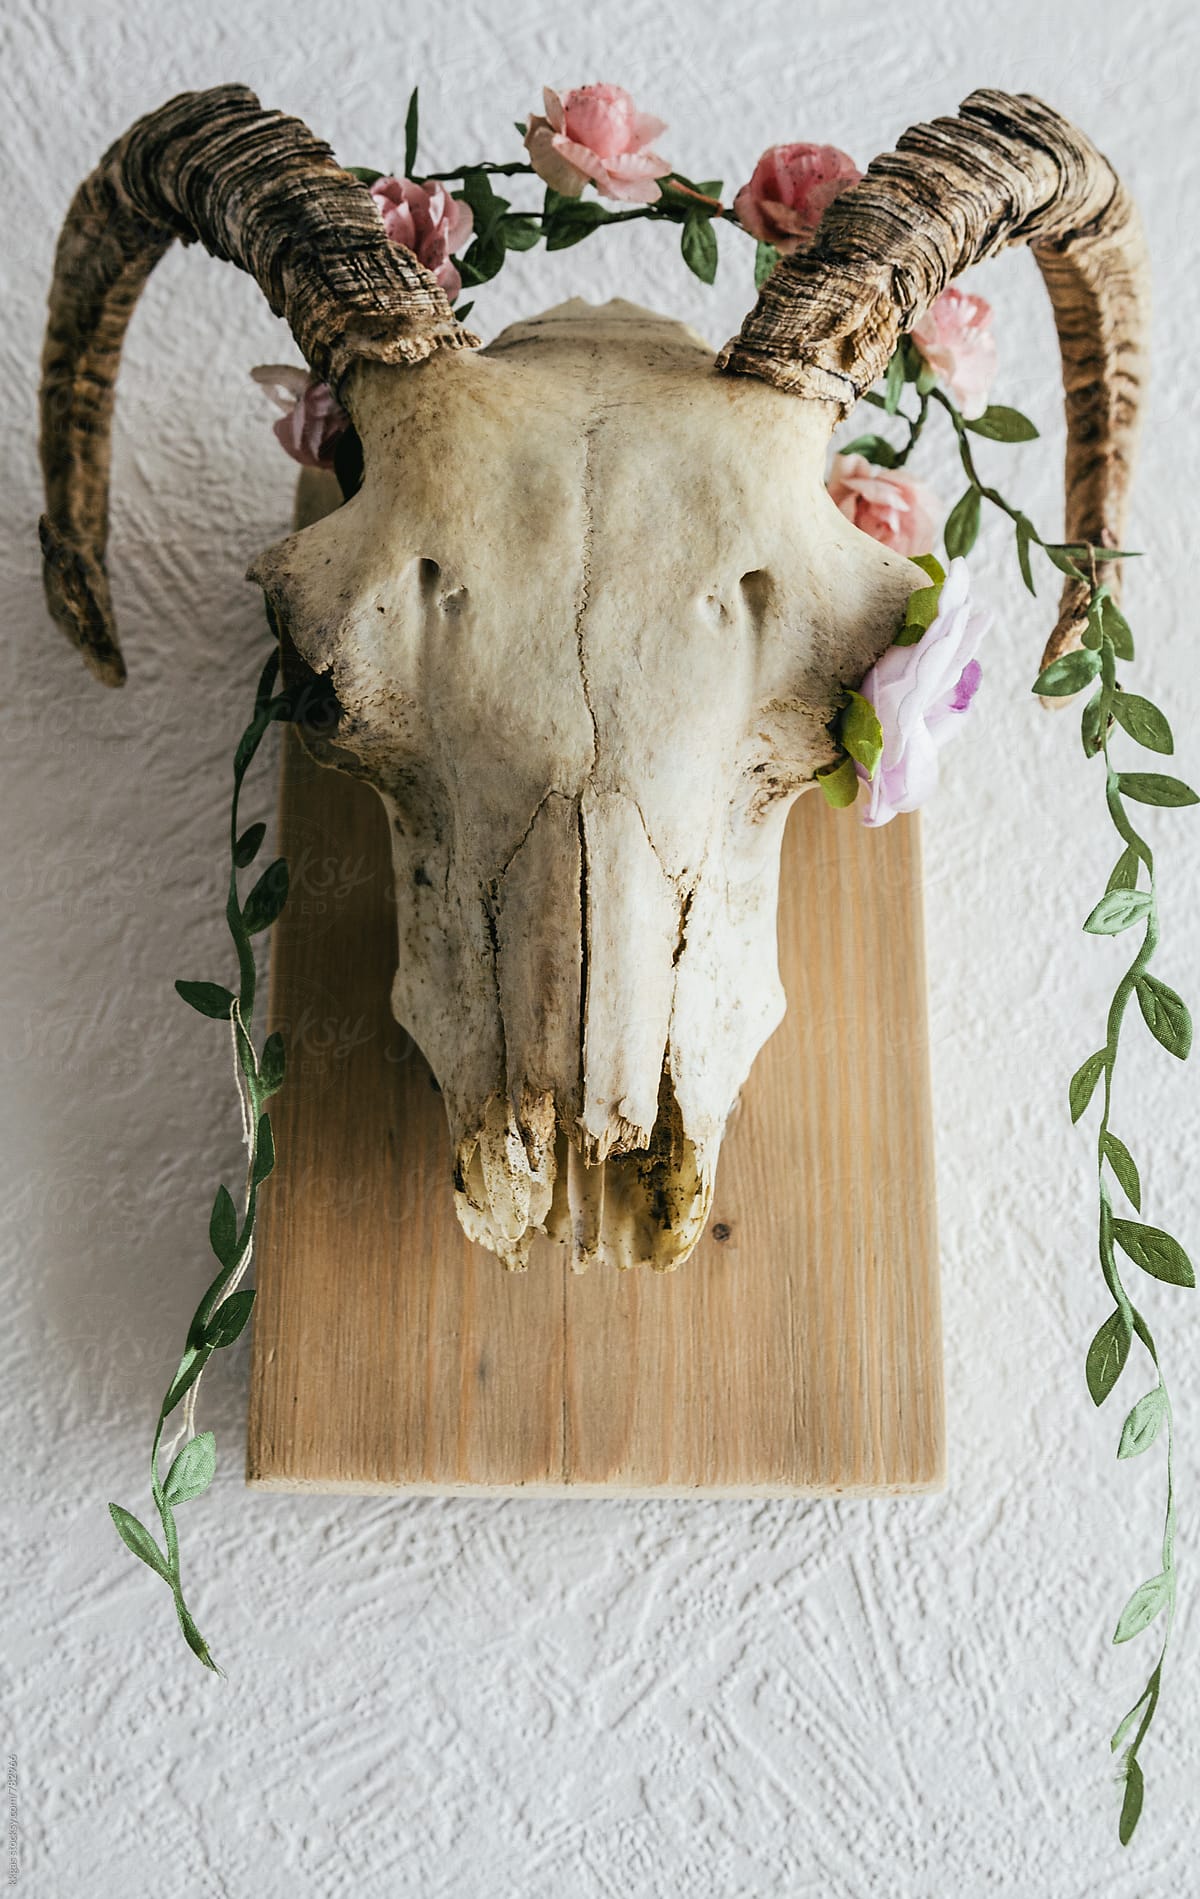 Rams Skull with flower garland decoration.